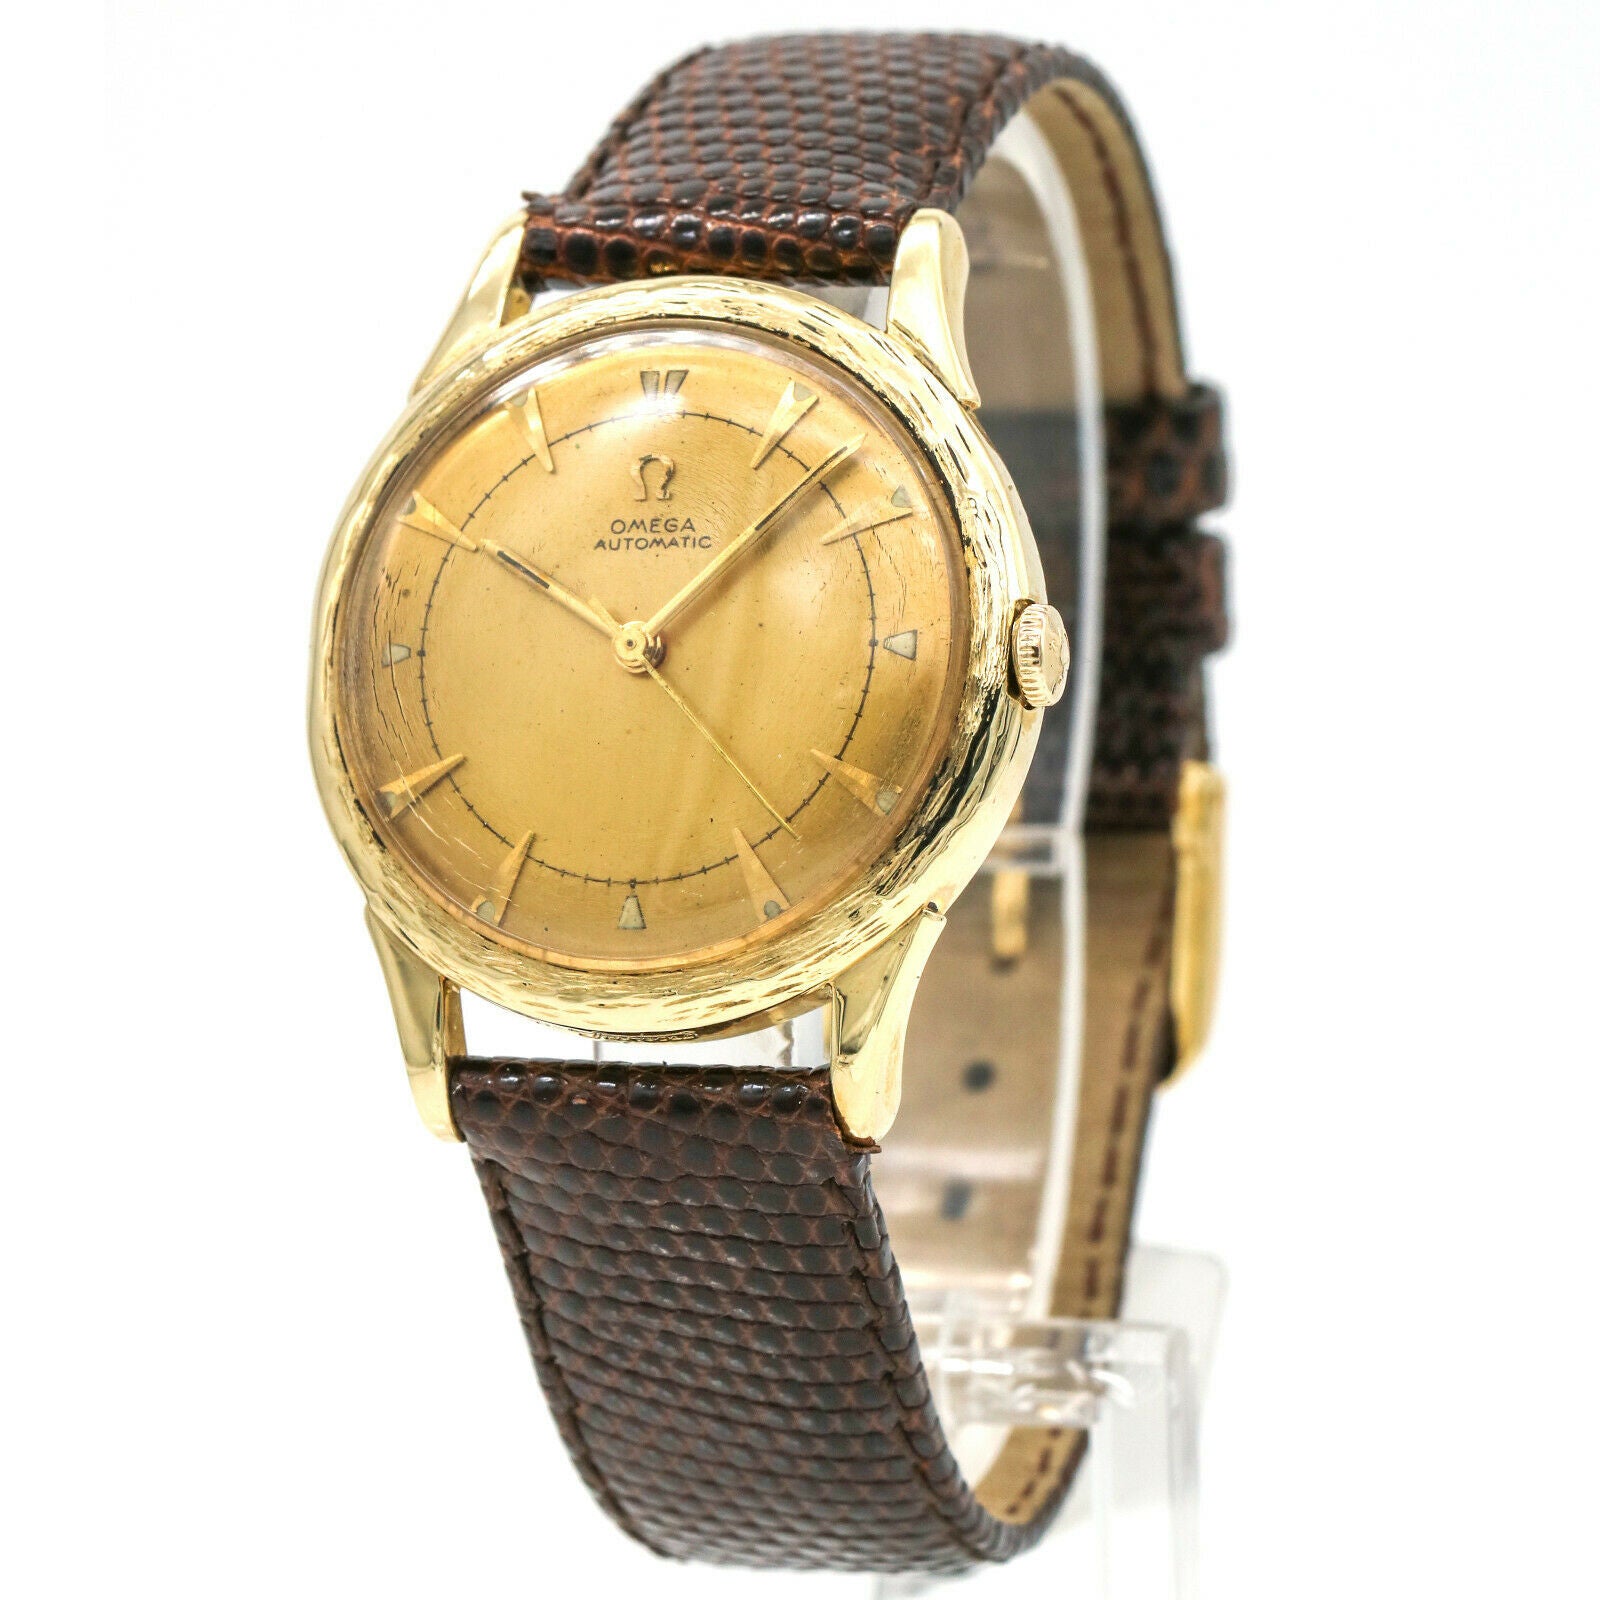 Omega 14k Yellow Gold Vintage Automatic Men's Watch with Textured Bezel Screw Ba